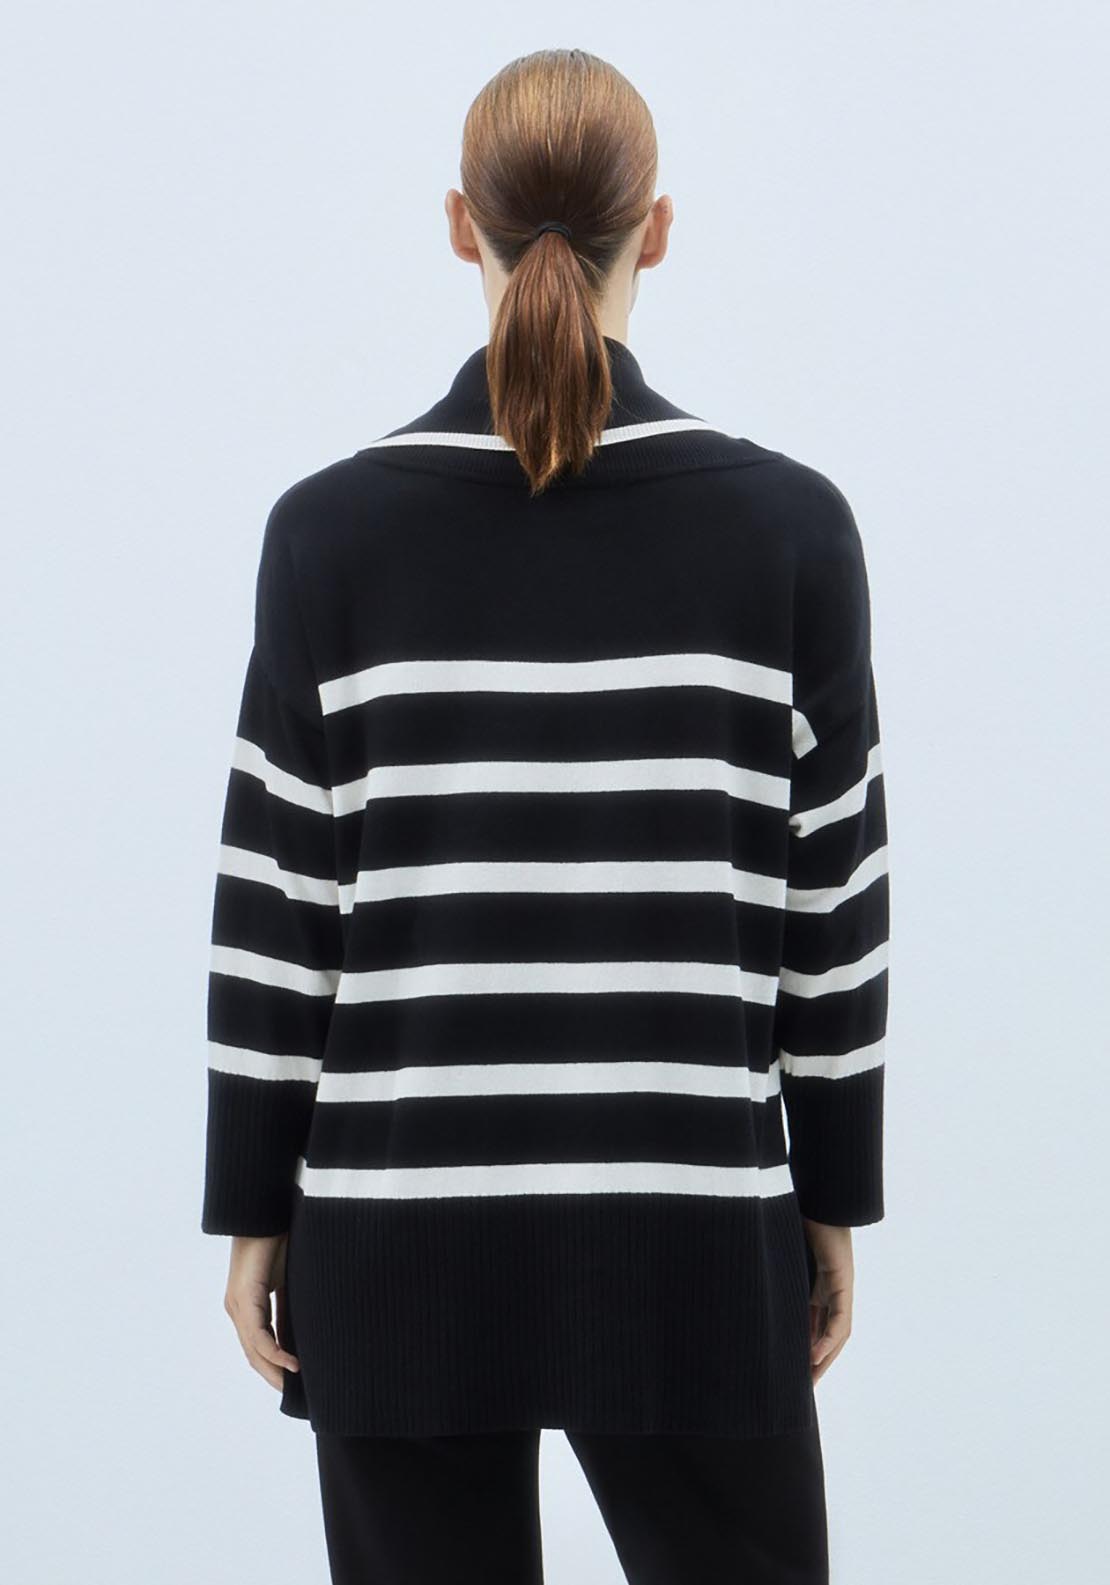 Couchel Round Collar Knit Sweater - Black 2 Shaws Department Stores